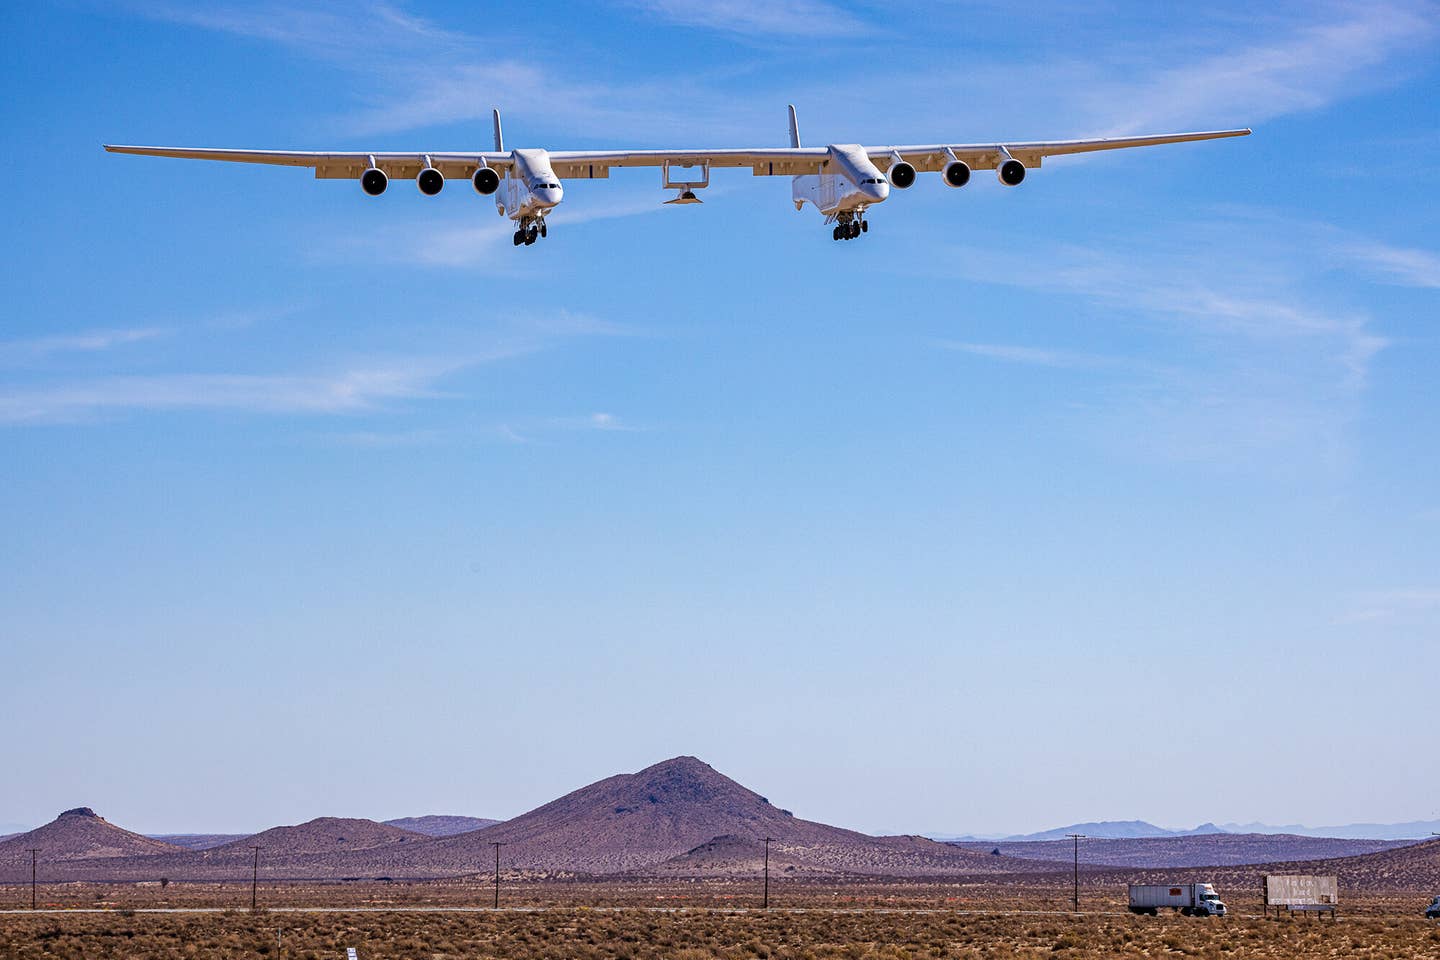 The Roc as it approaches a runway for landing. <em>Credit: Stratolaunch</em>